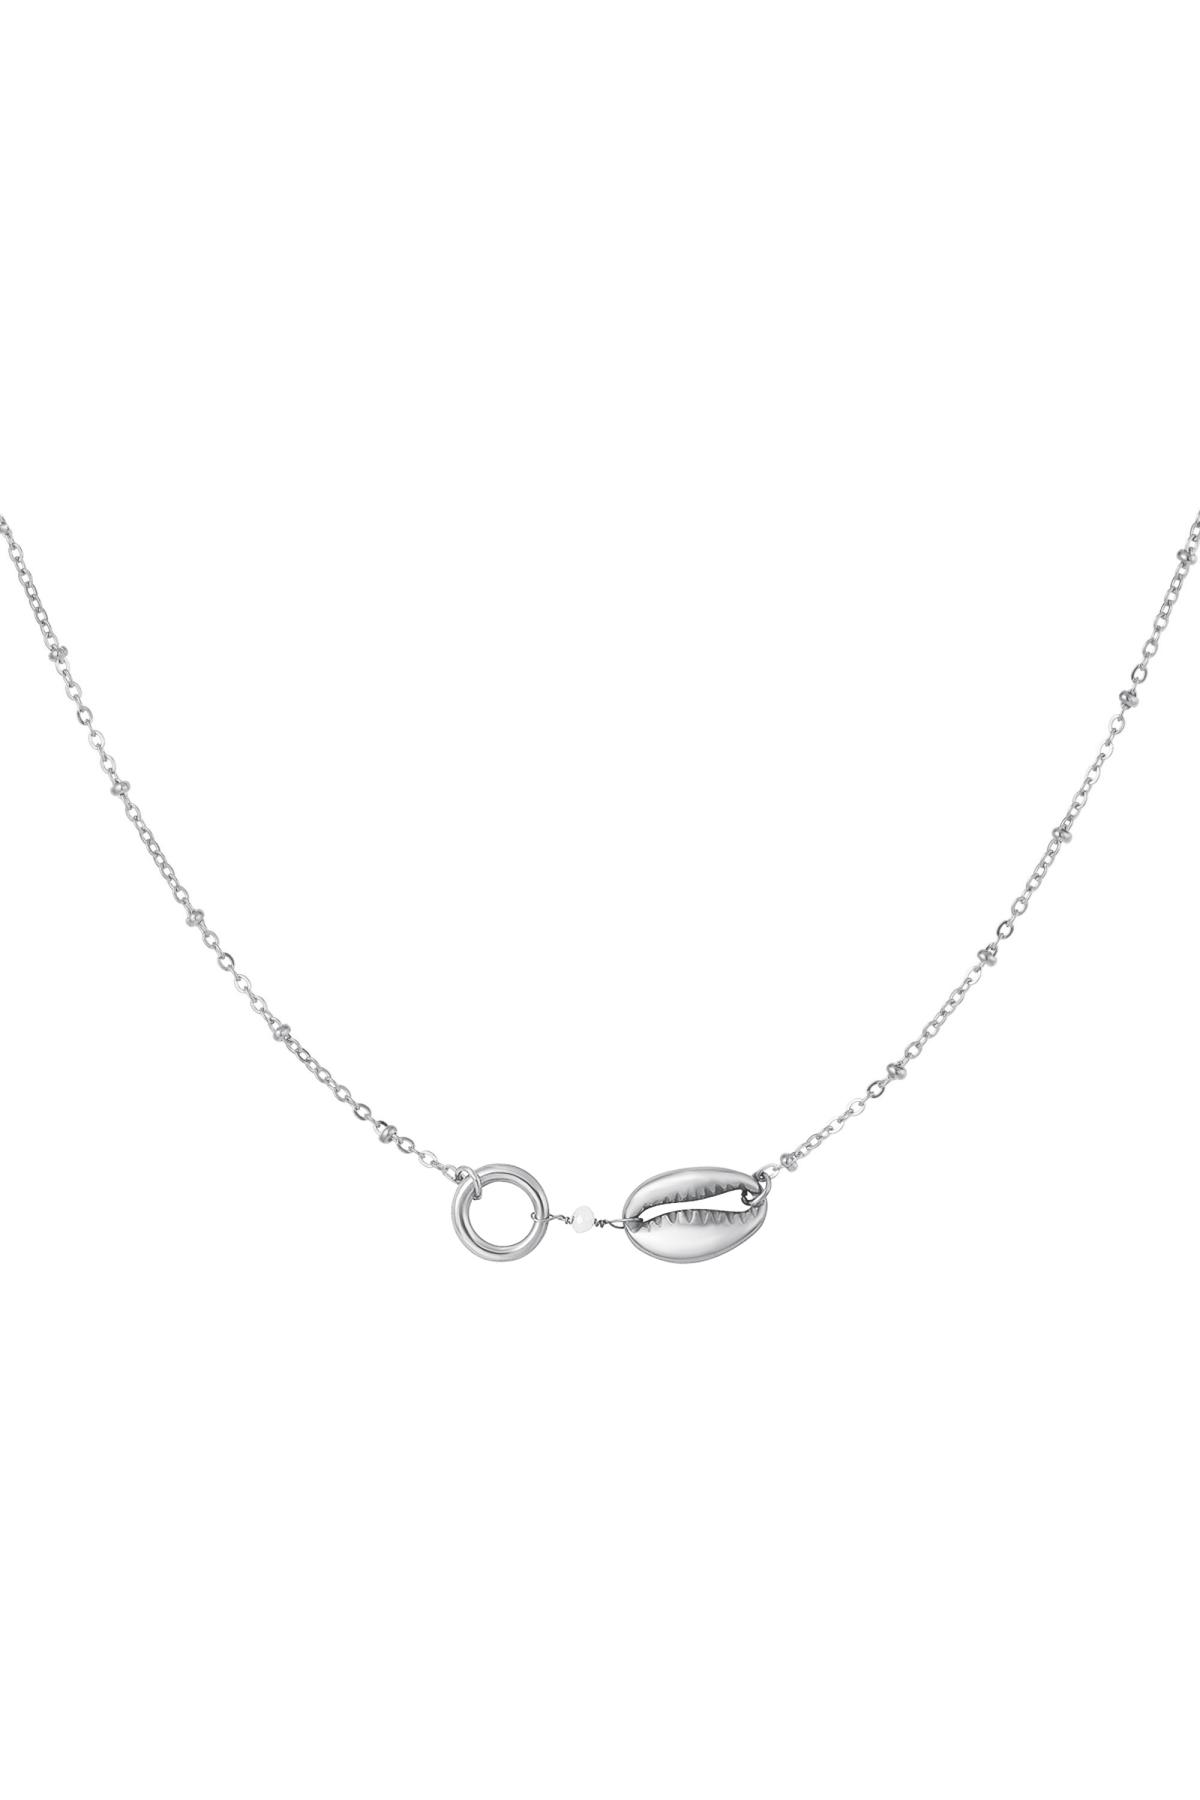 Shell necklace - Beach collection Silver Stainless Steel